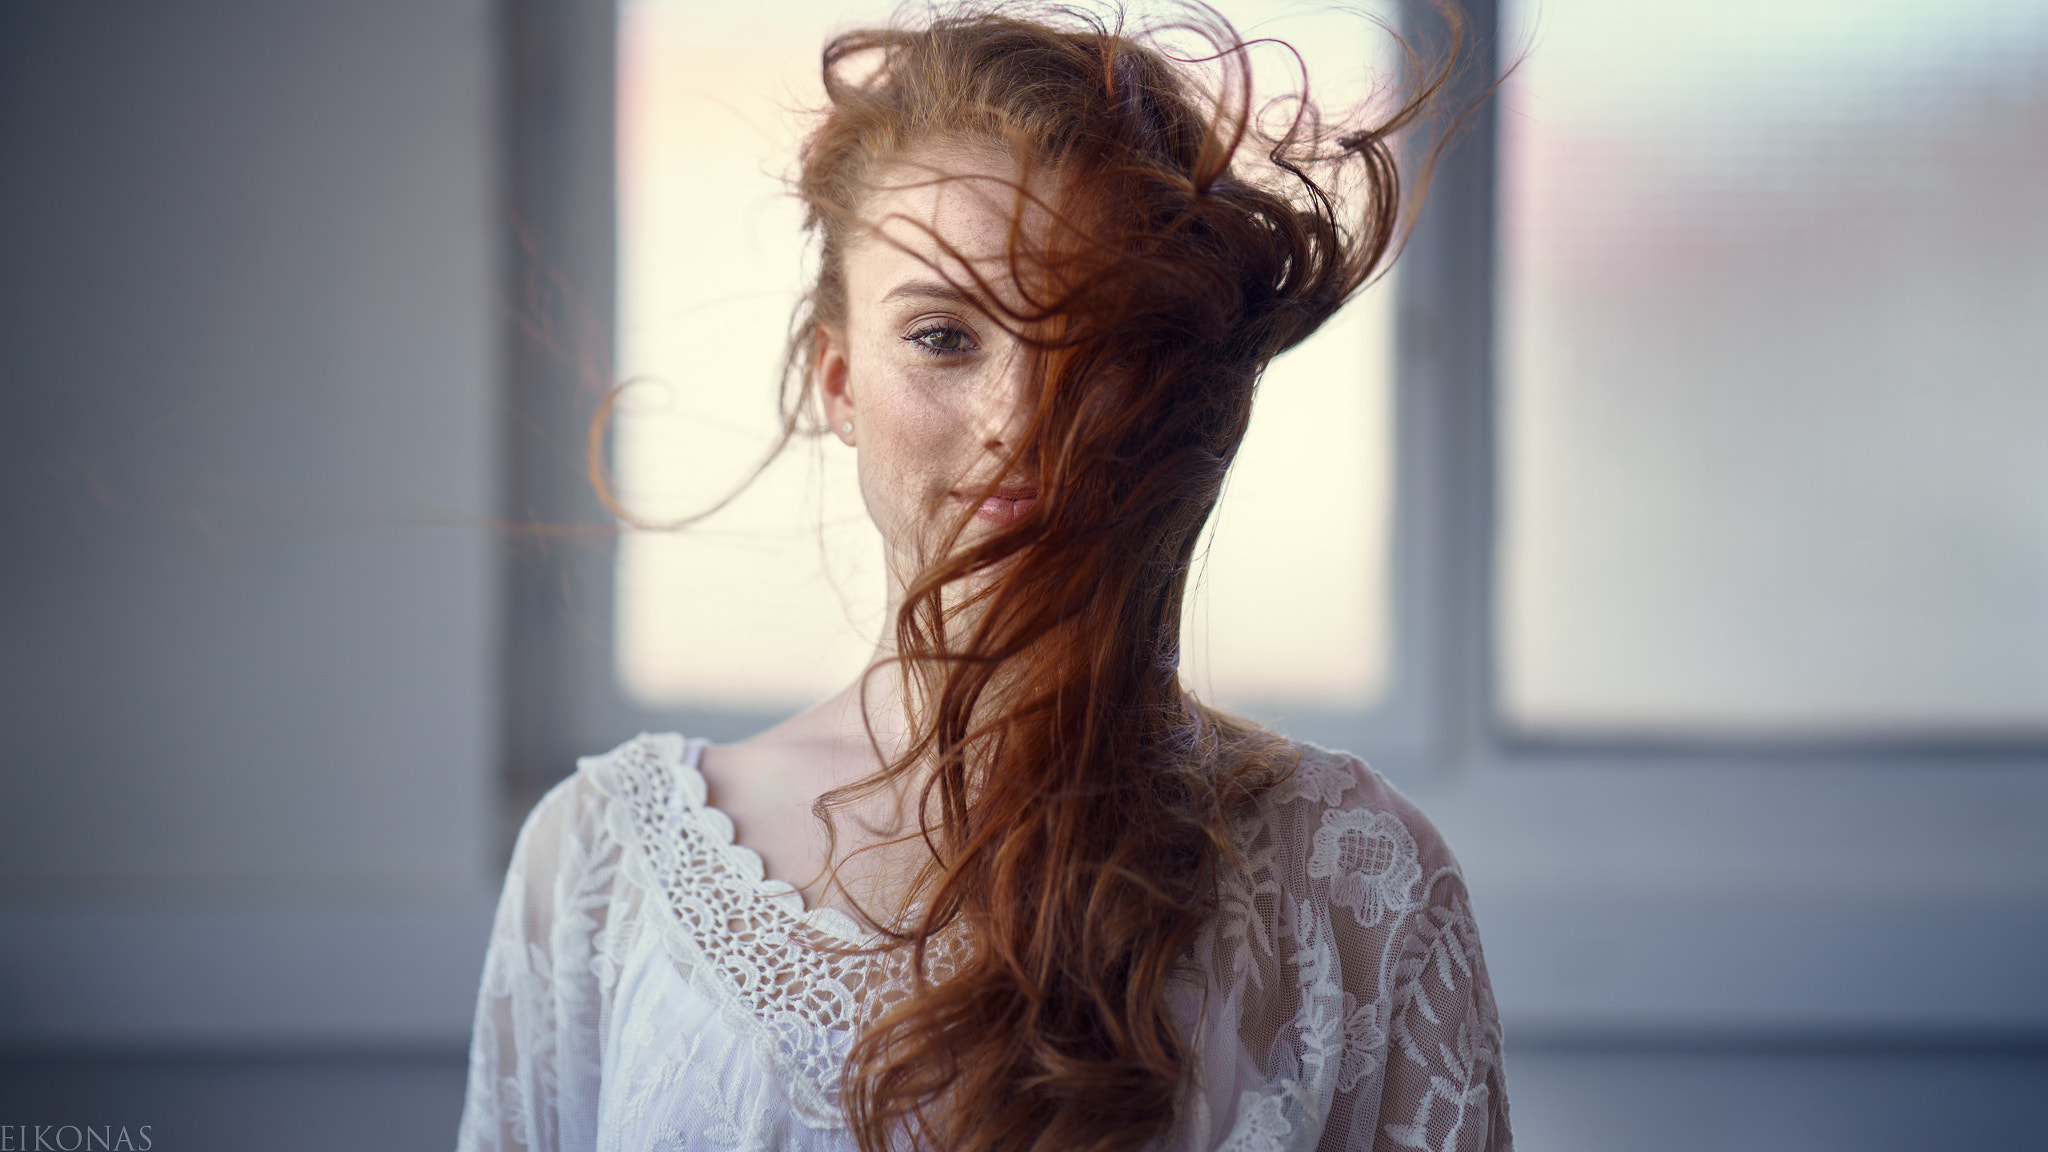 People 2048x1152 women redhead freckles smiling looking at viewer white shirt Eikonas hair blowing in the wind windy watermarked closeup